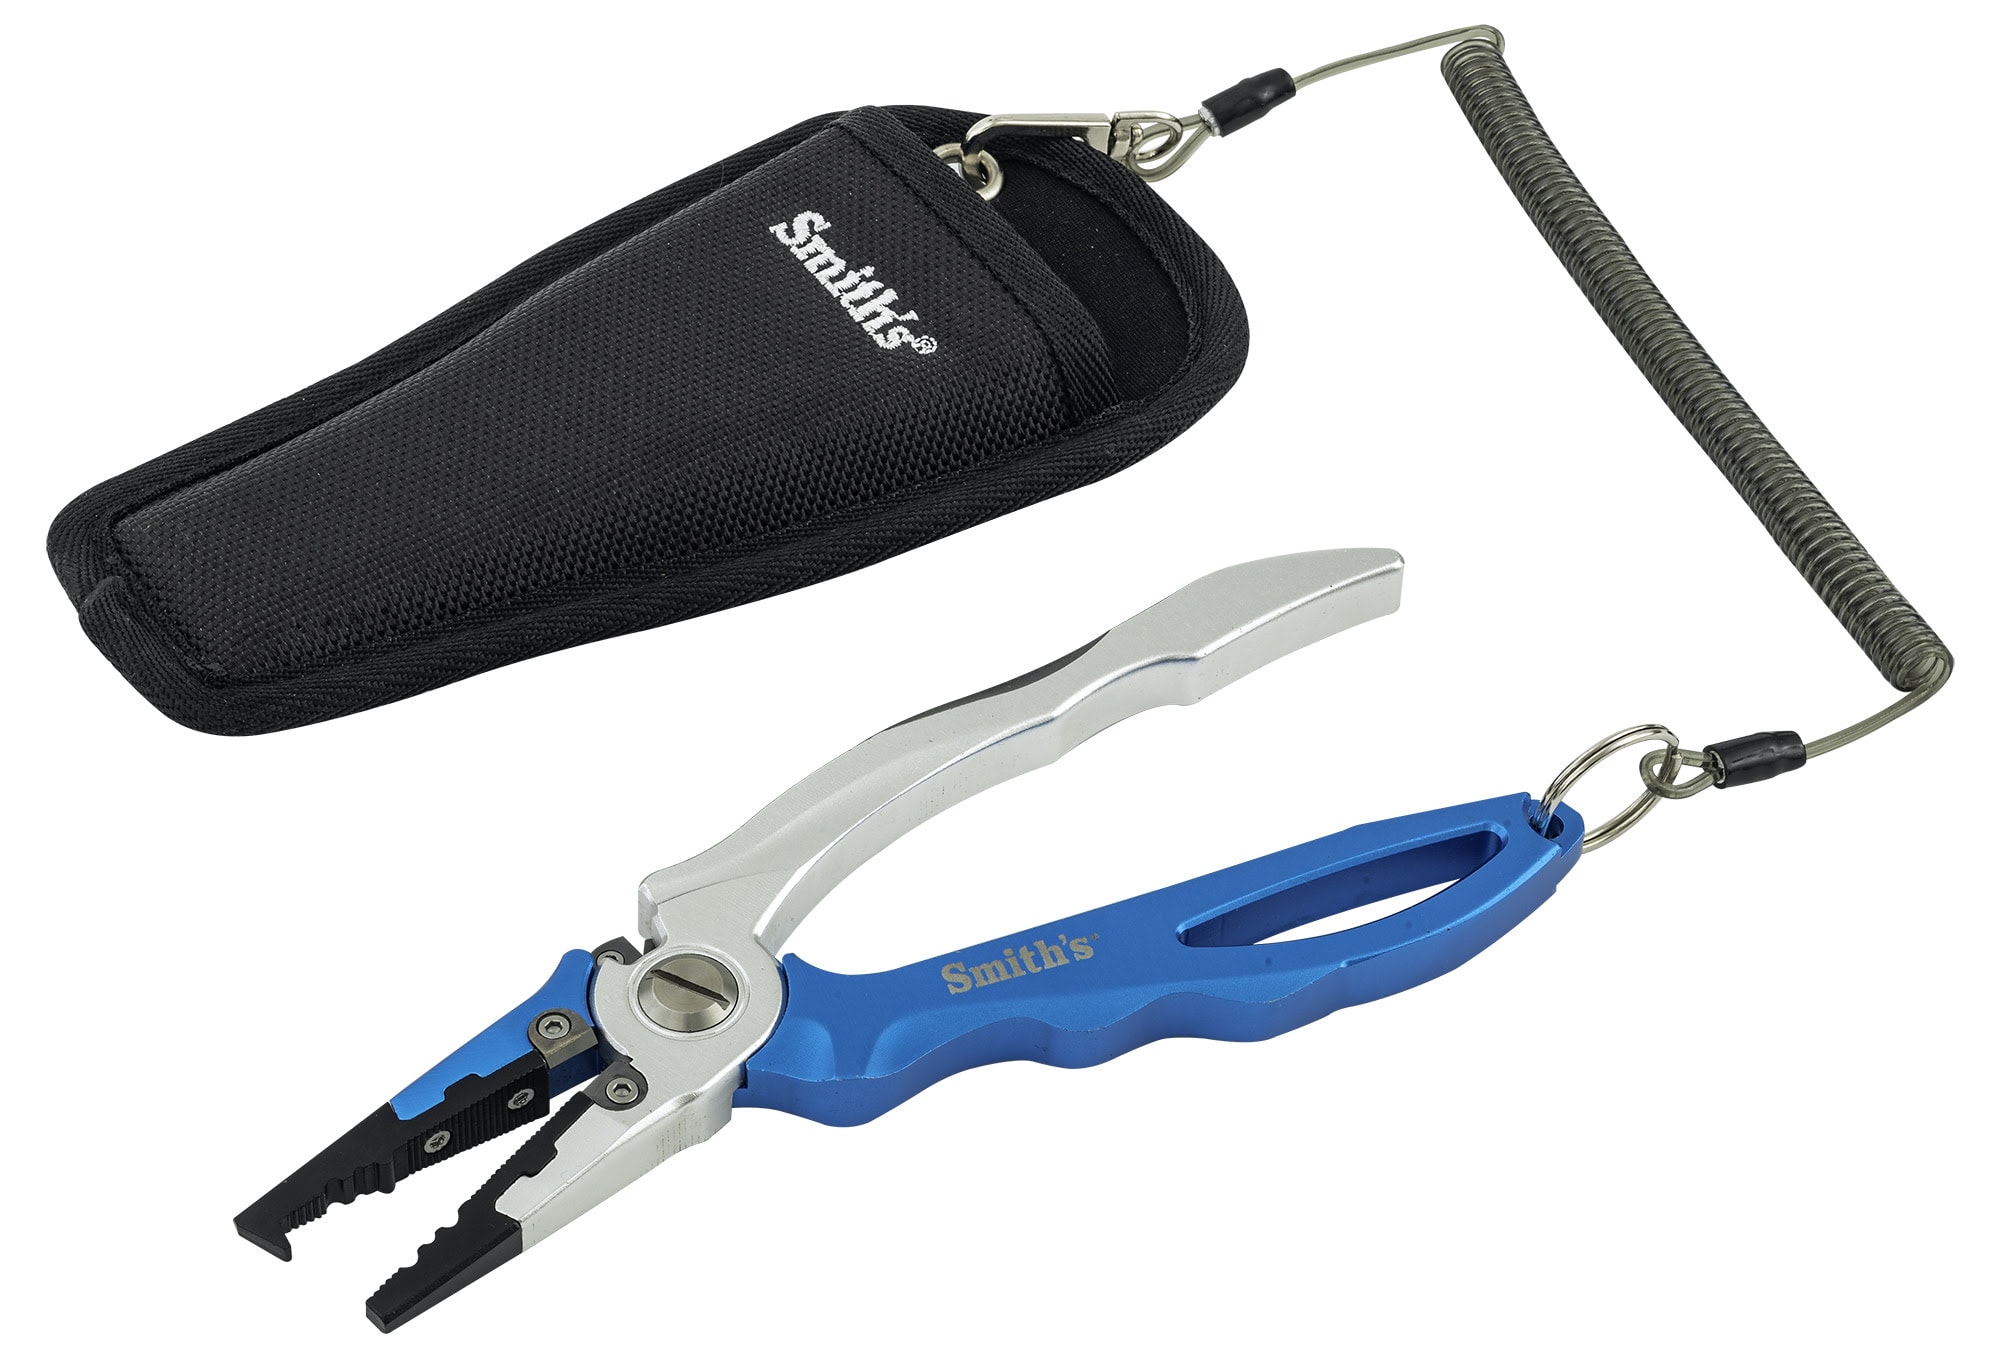 Introducing Smith's Regal River Fishing Pliers with Sharpener